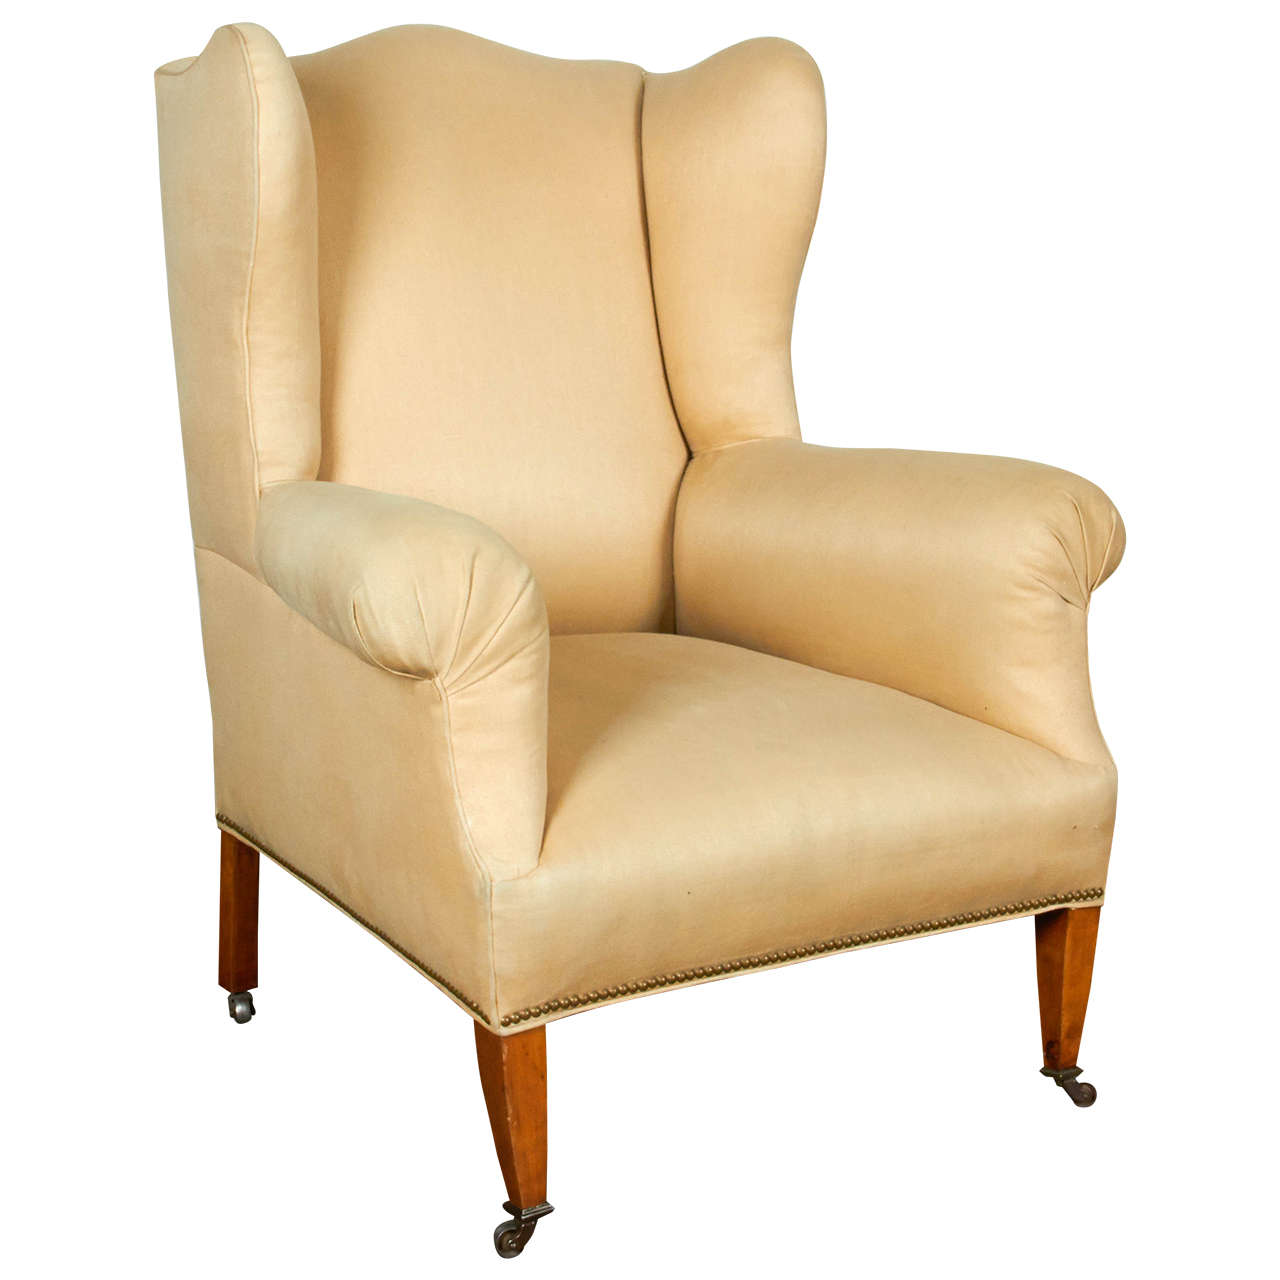 Hepplewhite Style Wing Chair For Sale